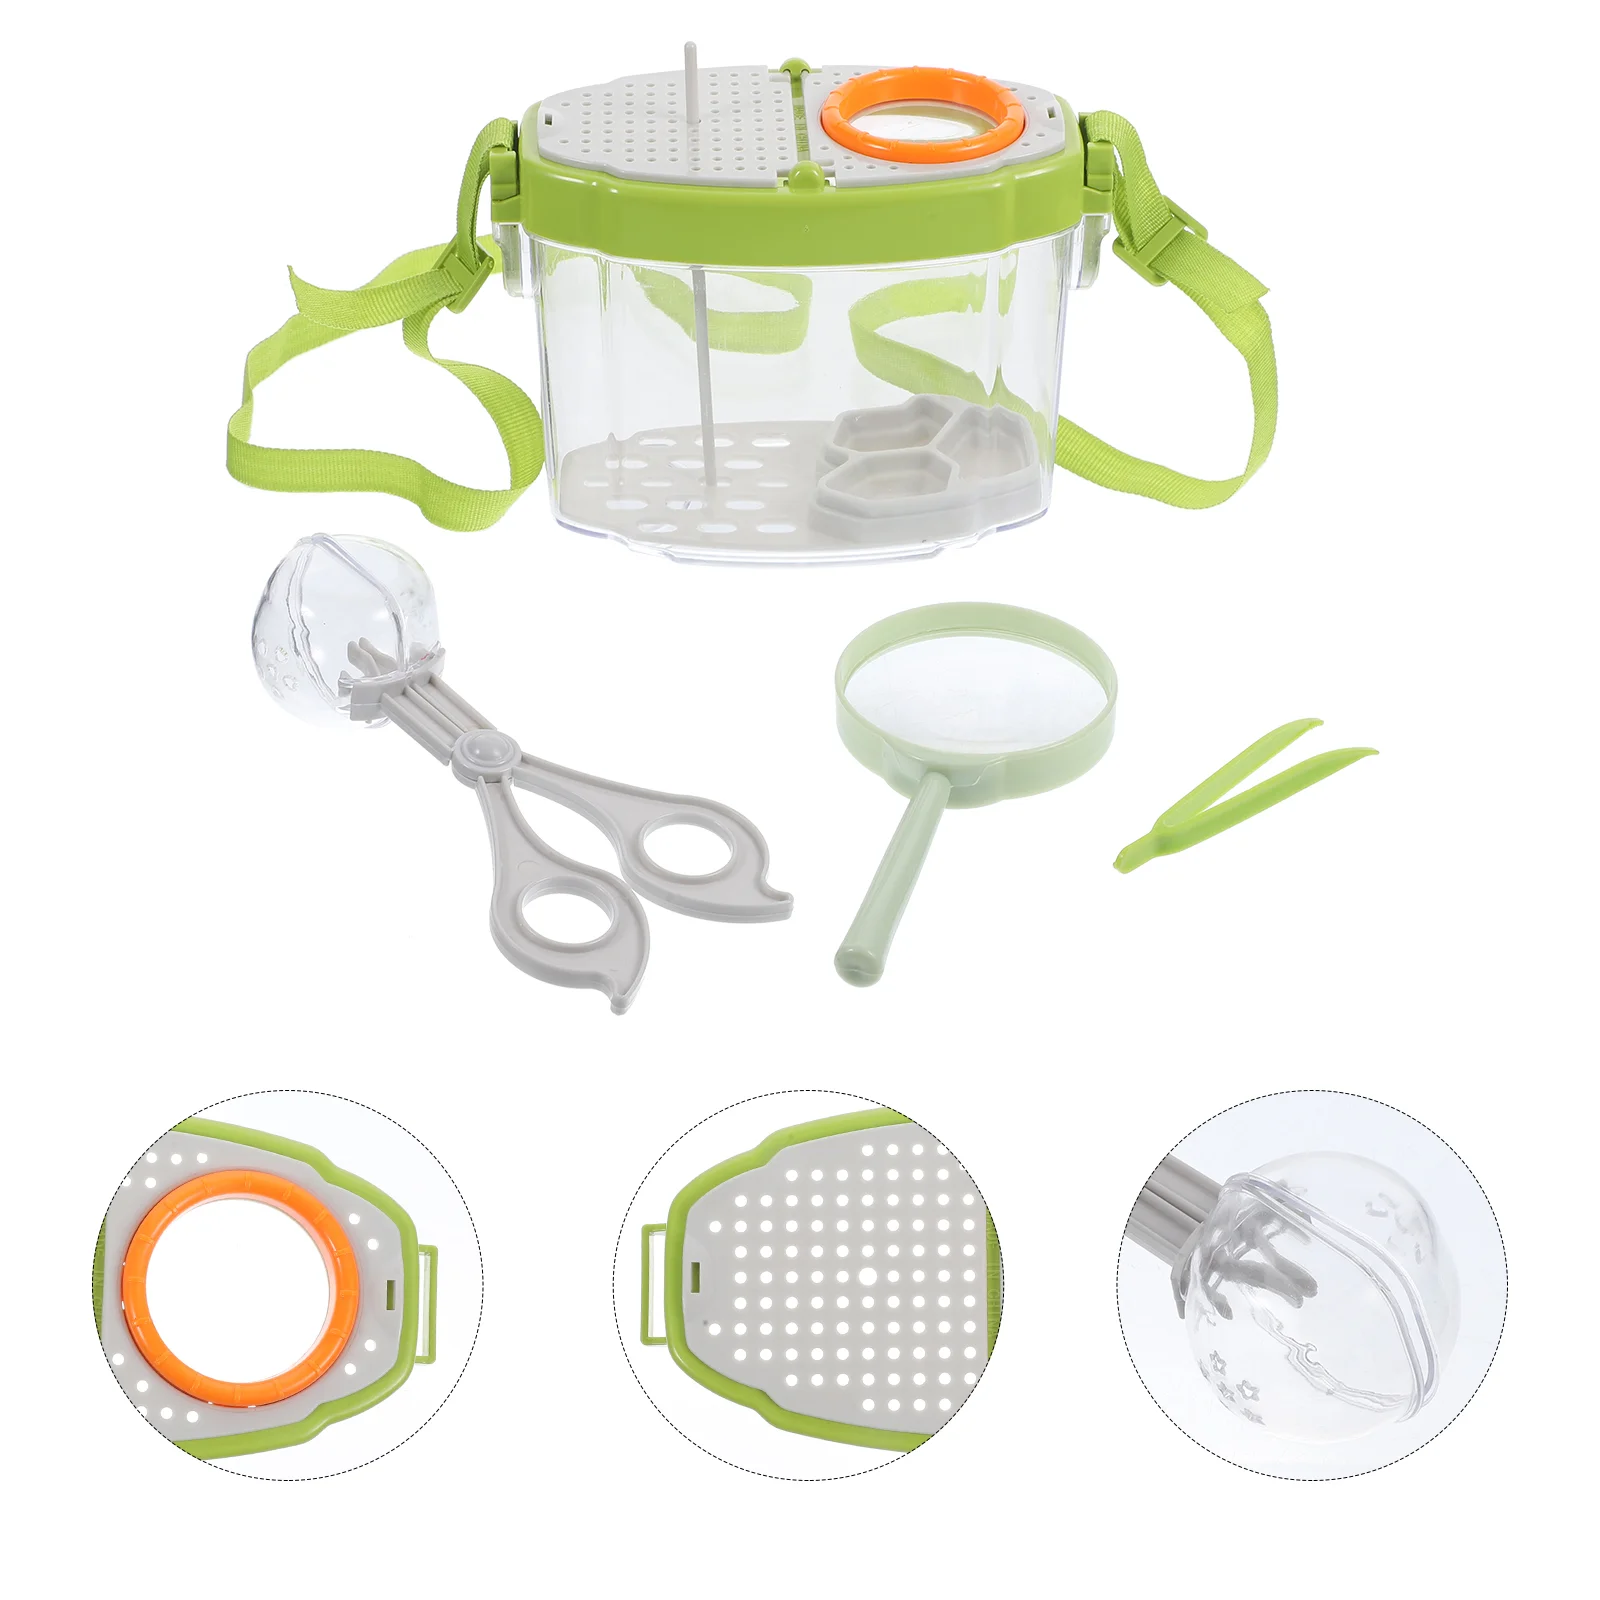 

Kids Insect Observation Kit Outdoor Toy Science Educational Exploration Catcher Net Plastic Bug Catching Toddler